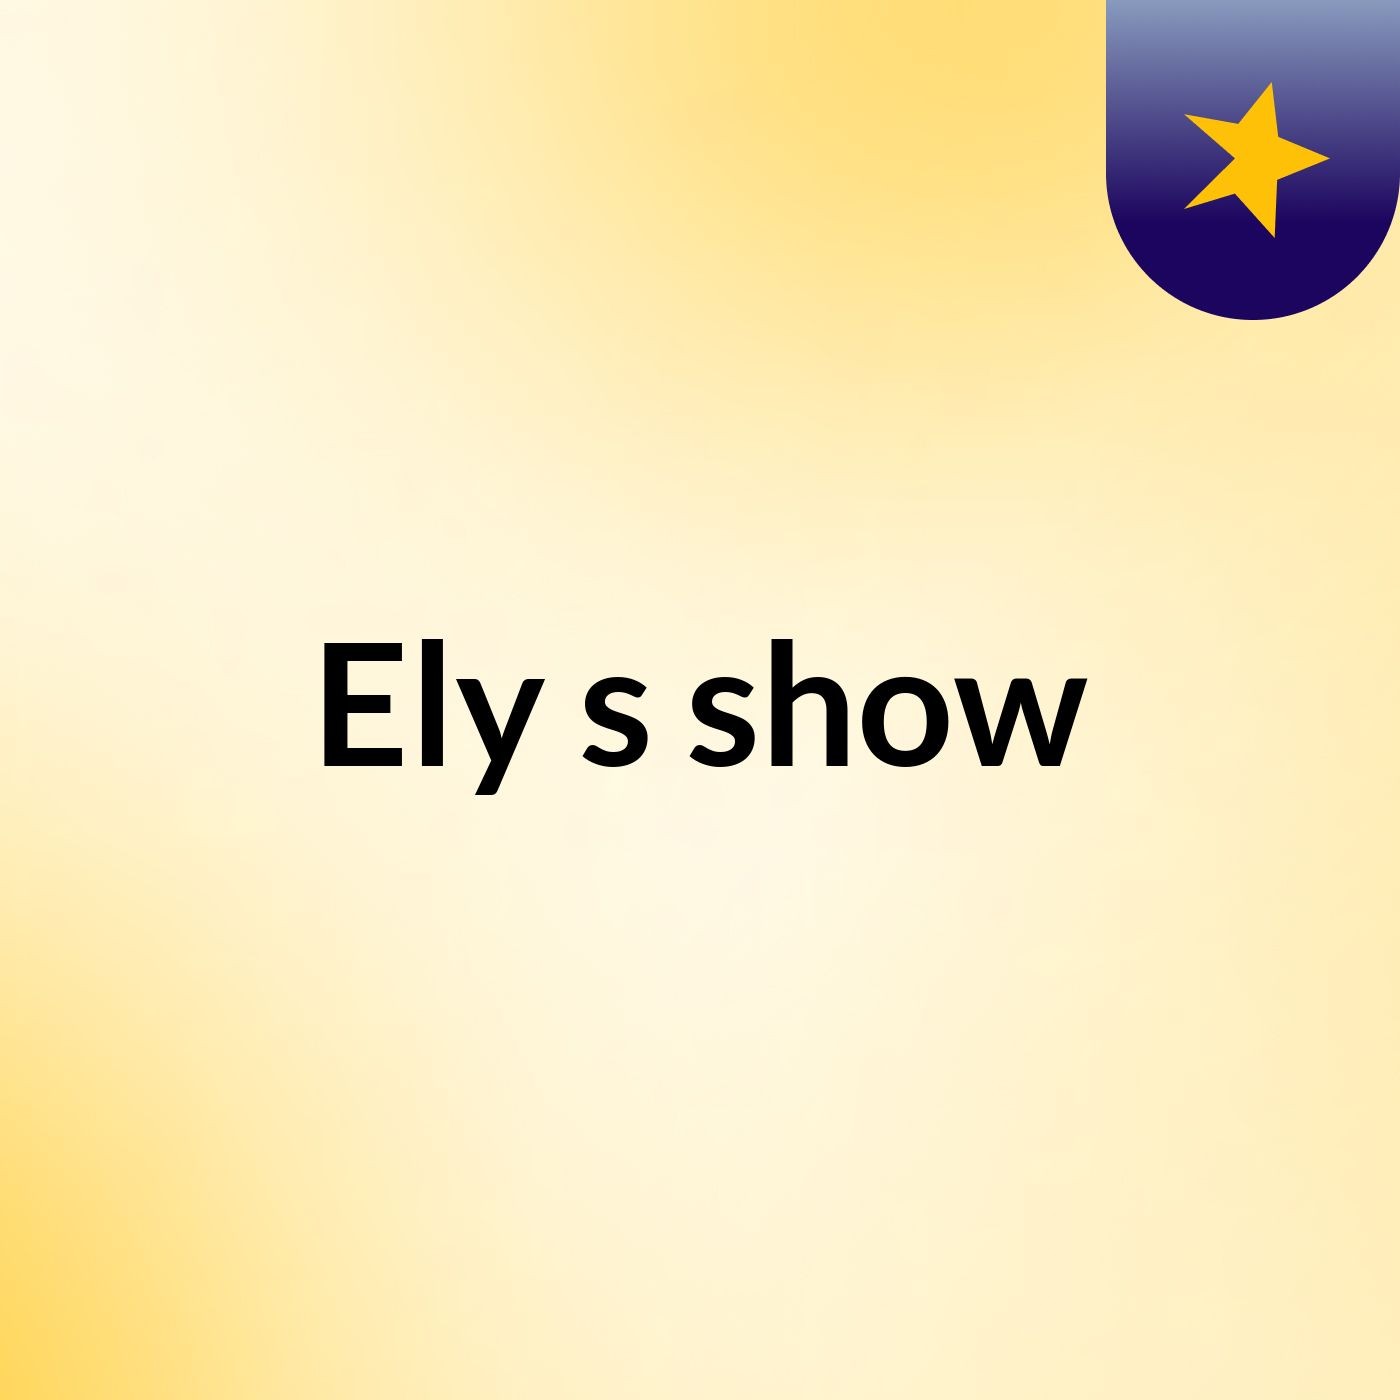 Ely's show